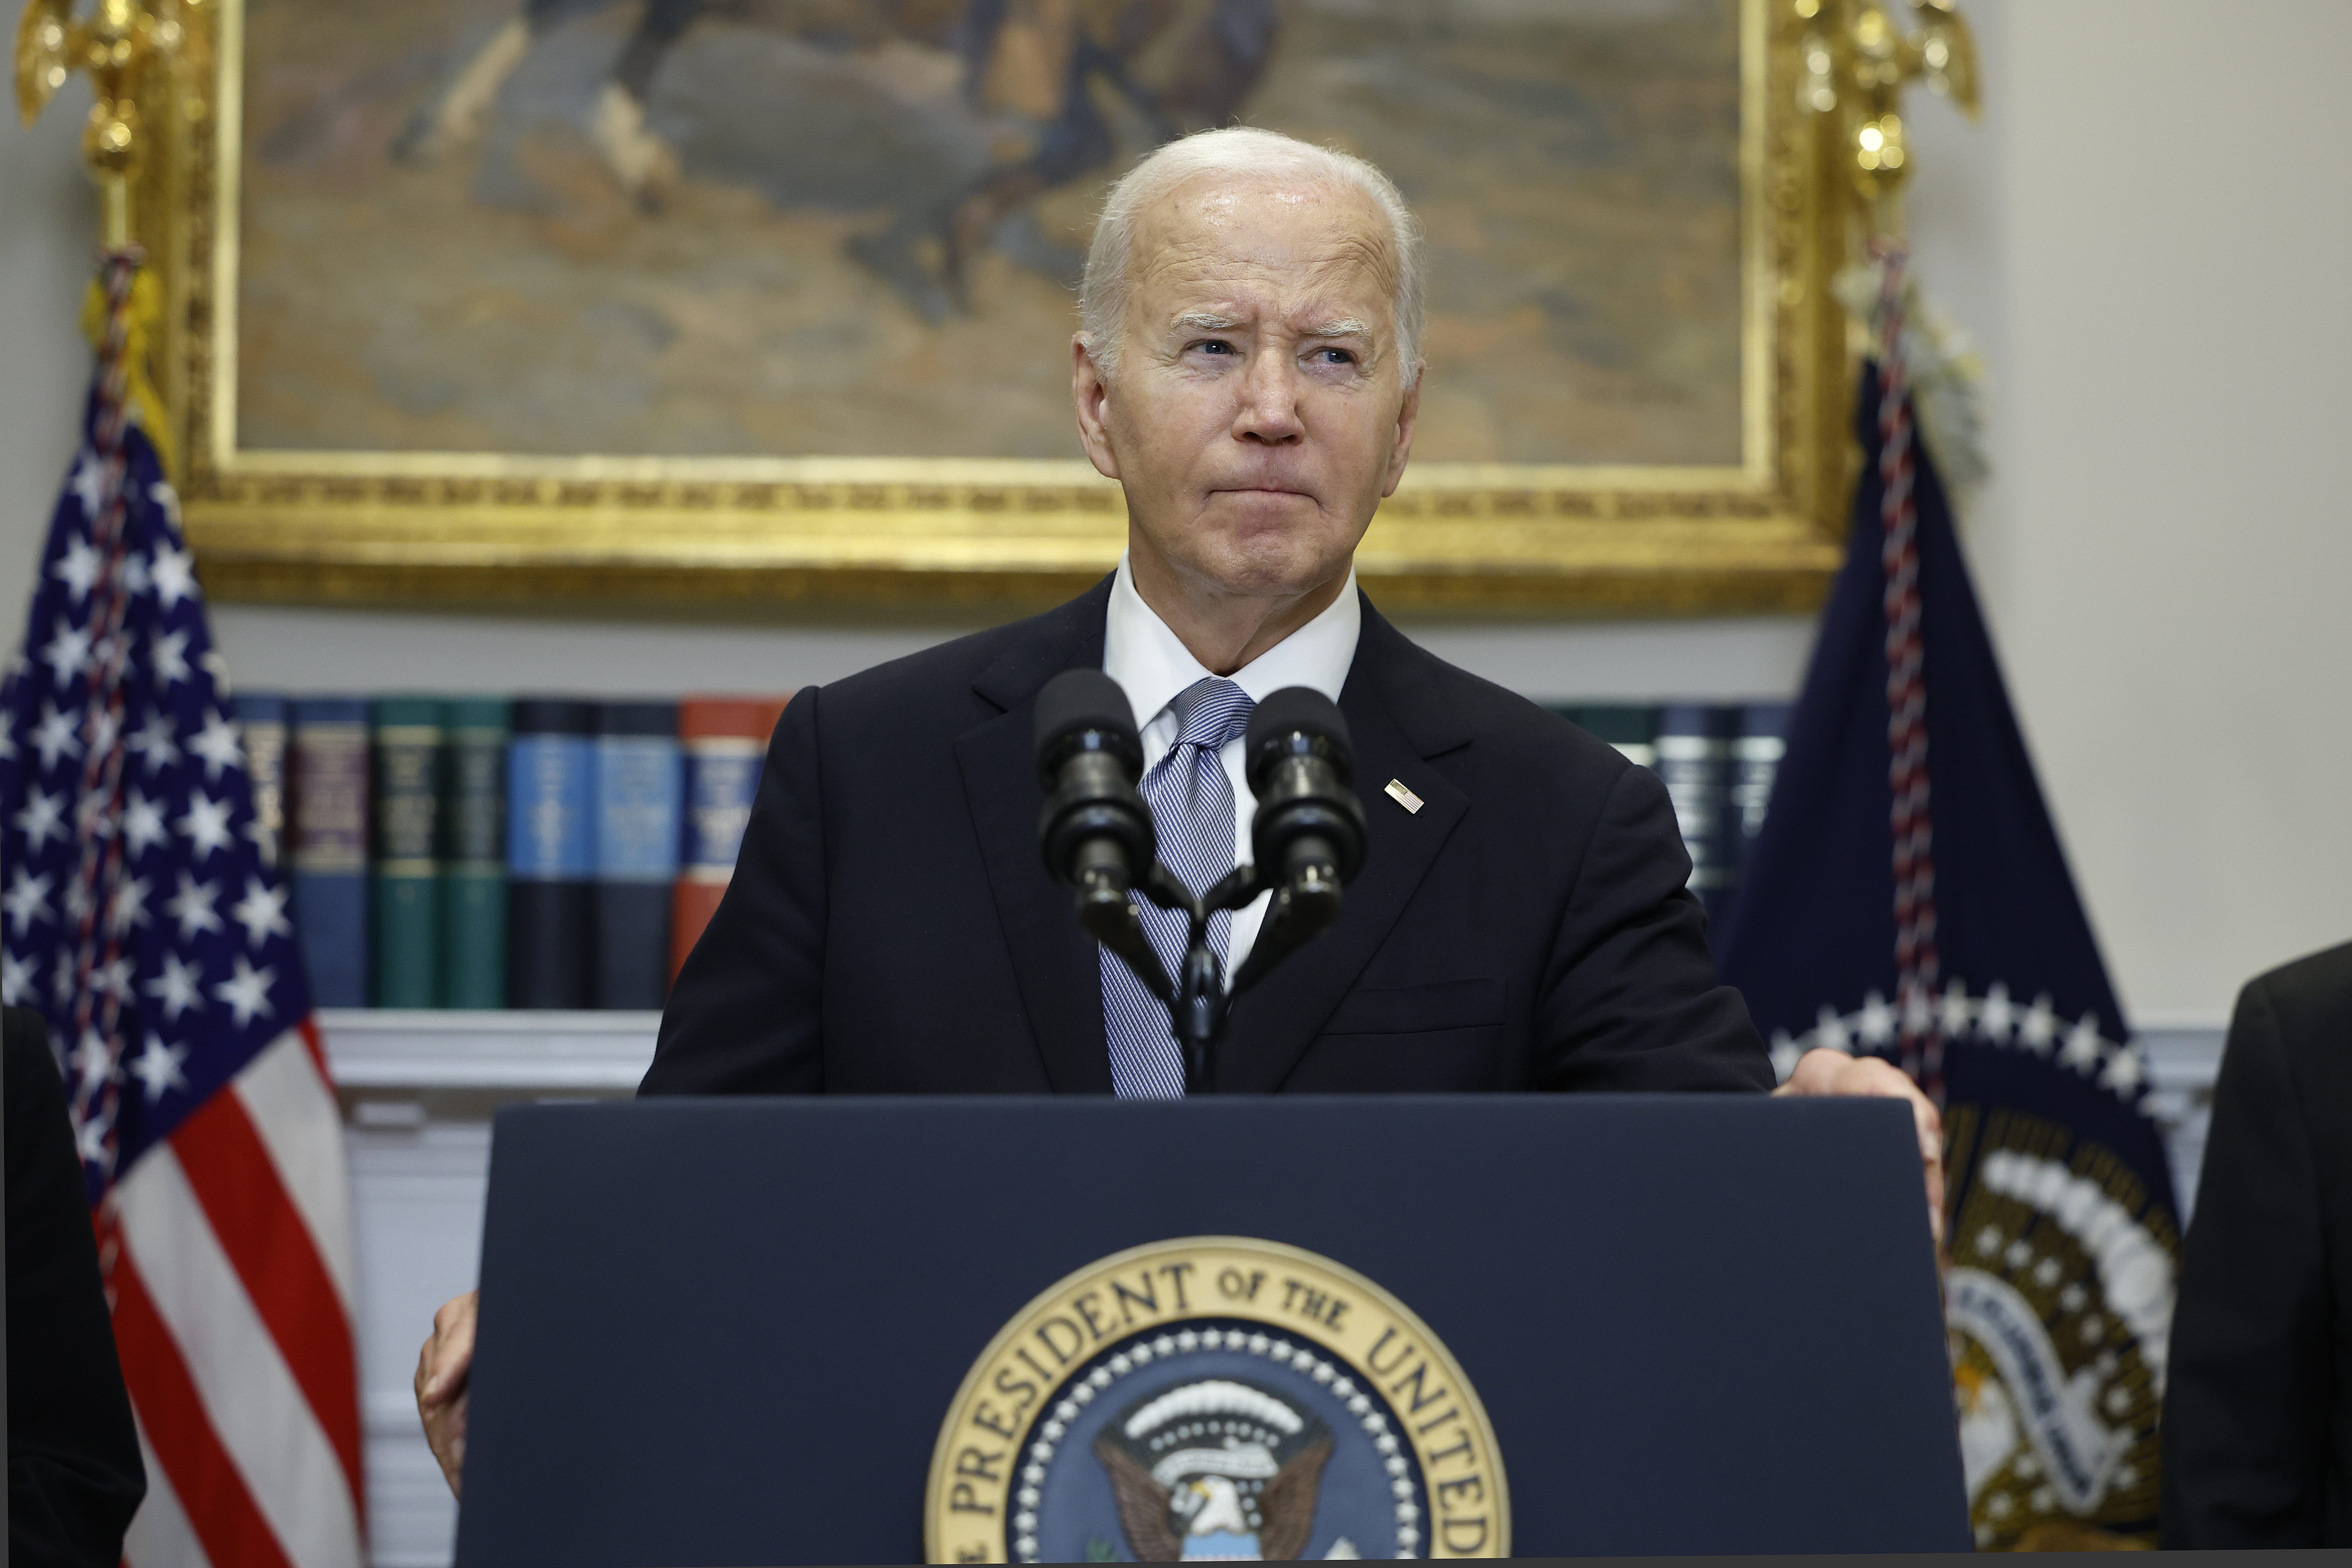 Biden will make a case for his legacy – and for Harris to continue it – in his Oval Office address